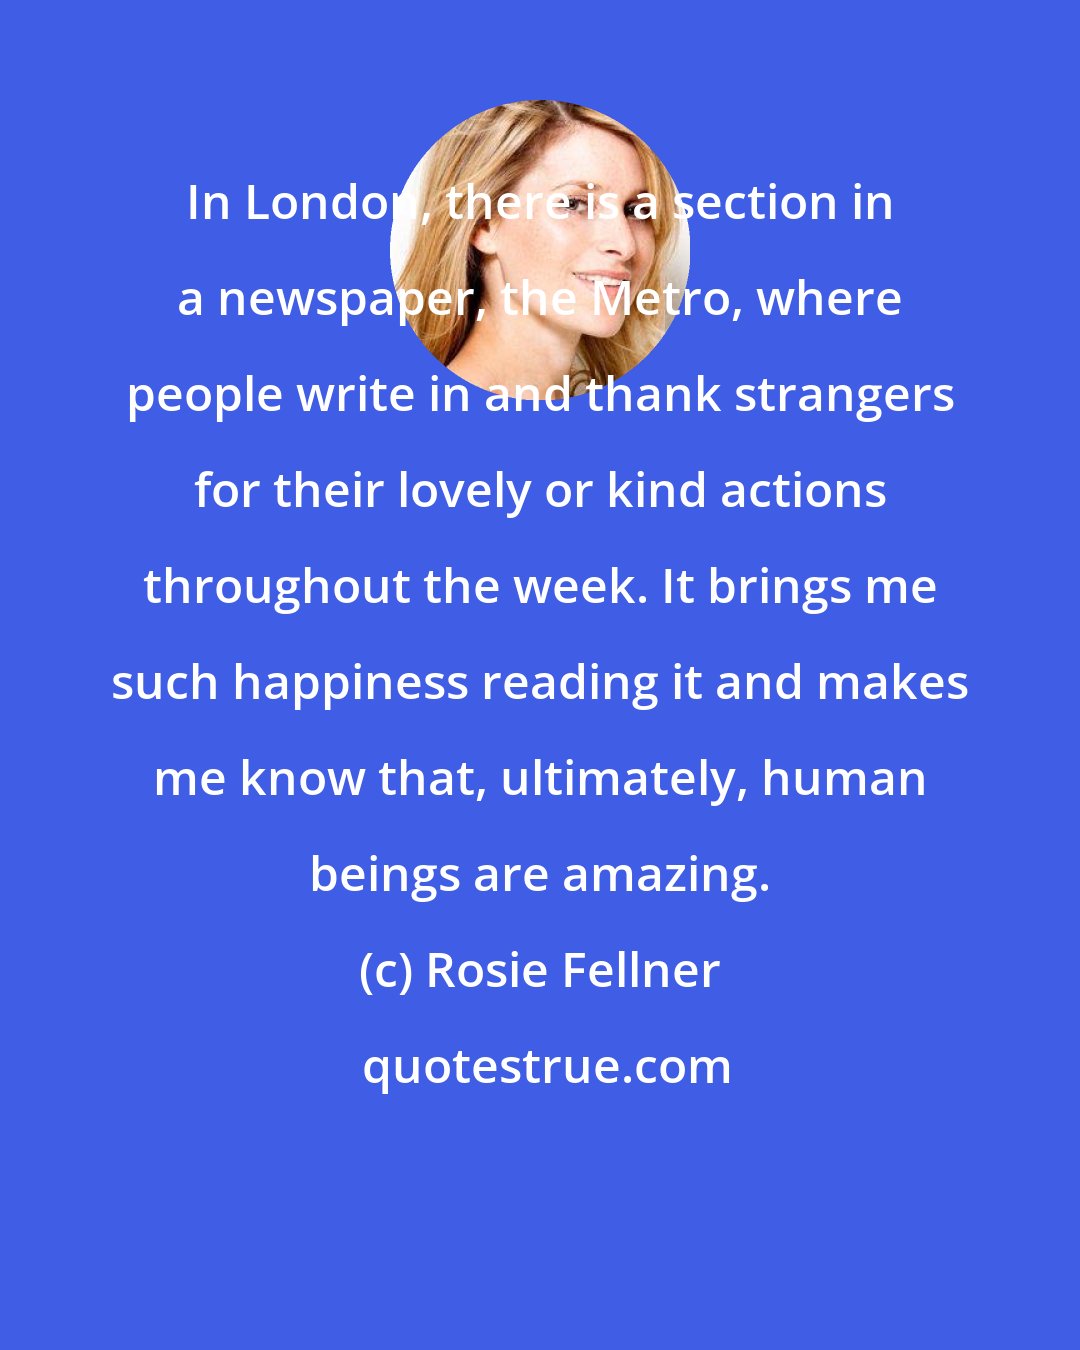 Rosie Fellner: In London, there is a section in a newspaper, the Metro, where people write in and thank strangers for their lovely or kind actions throughout the week. It brings me such happiness reading it and makes me know that, ultimately, human beings are amazing.